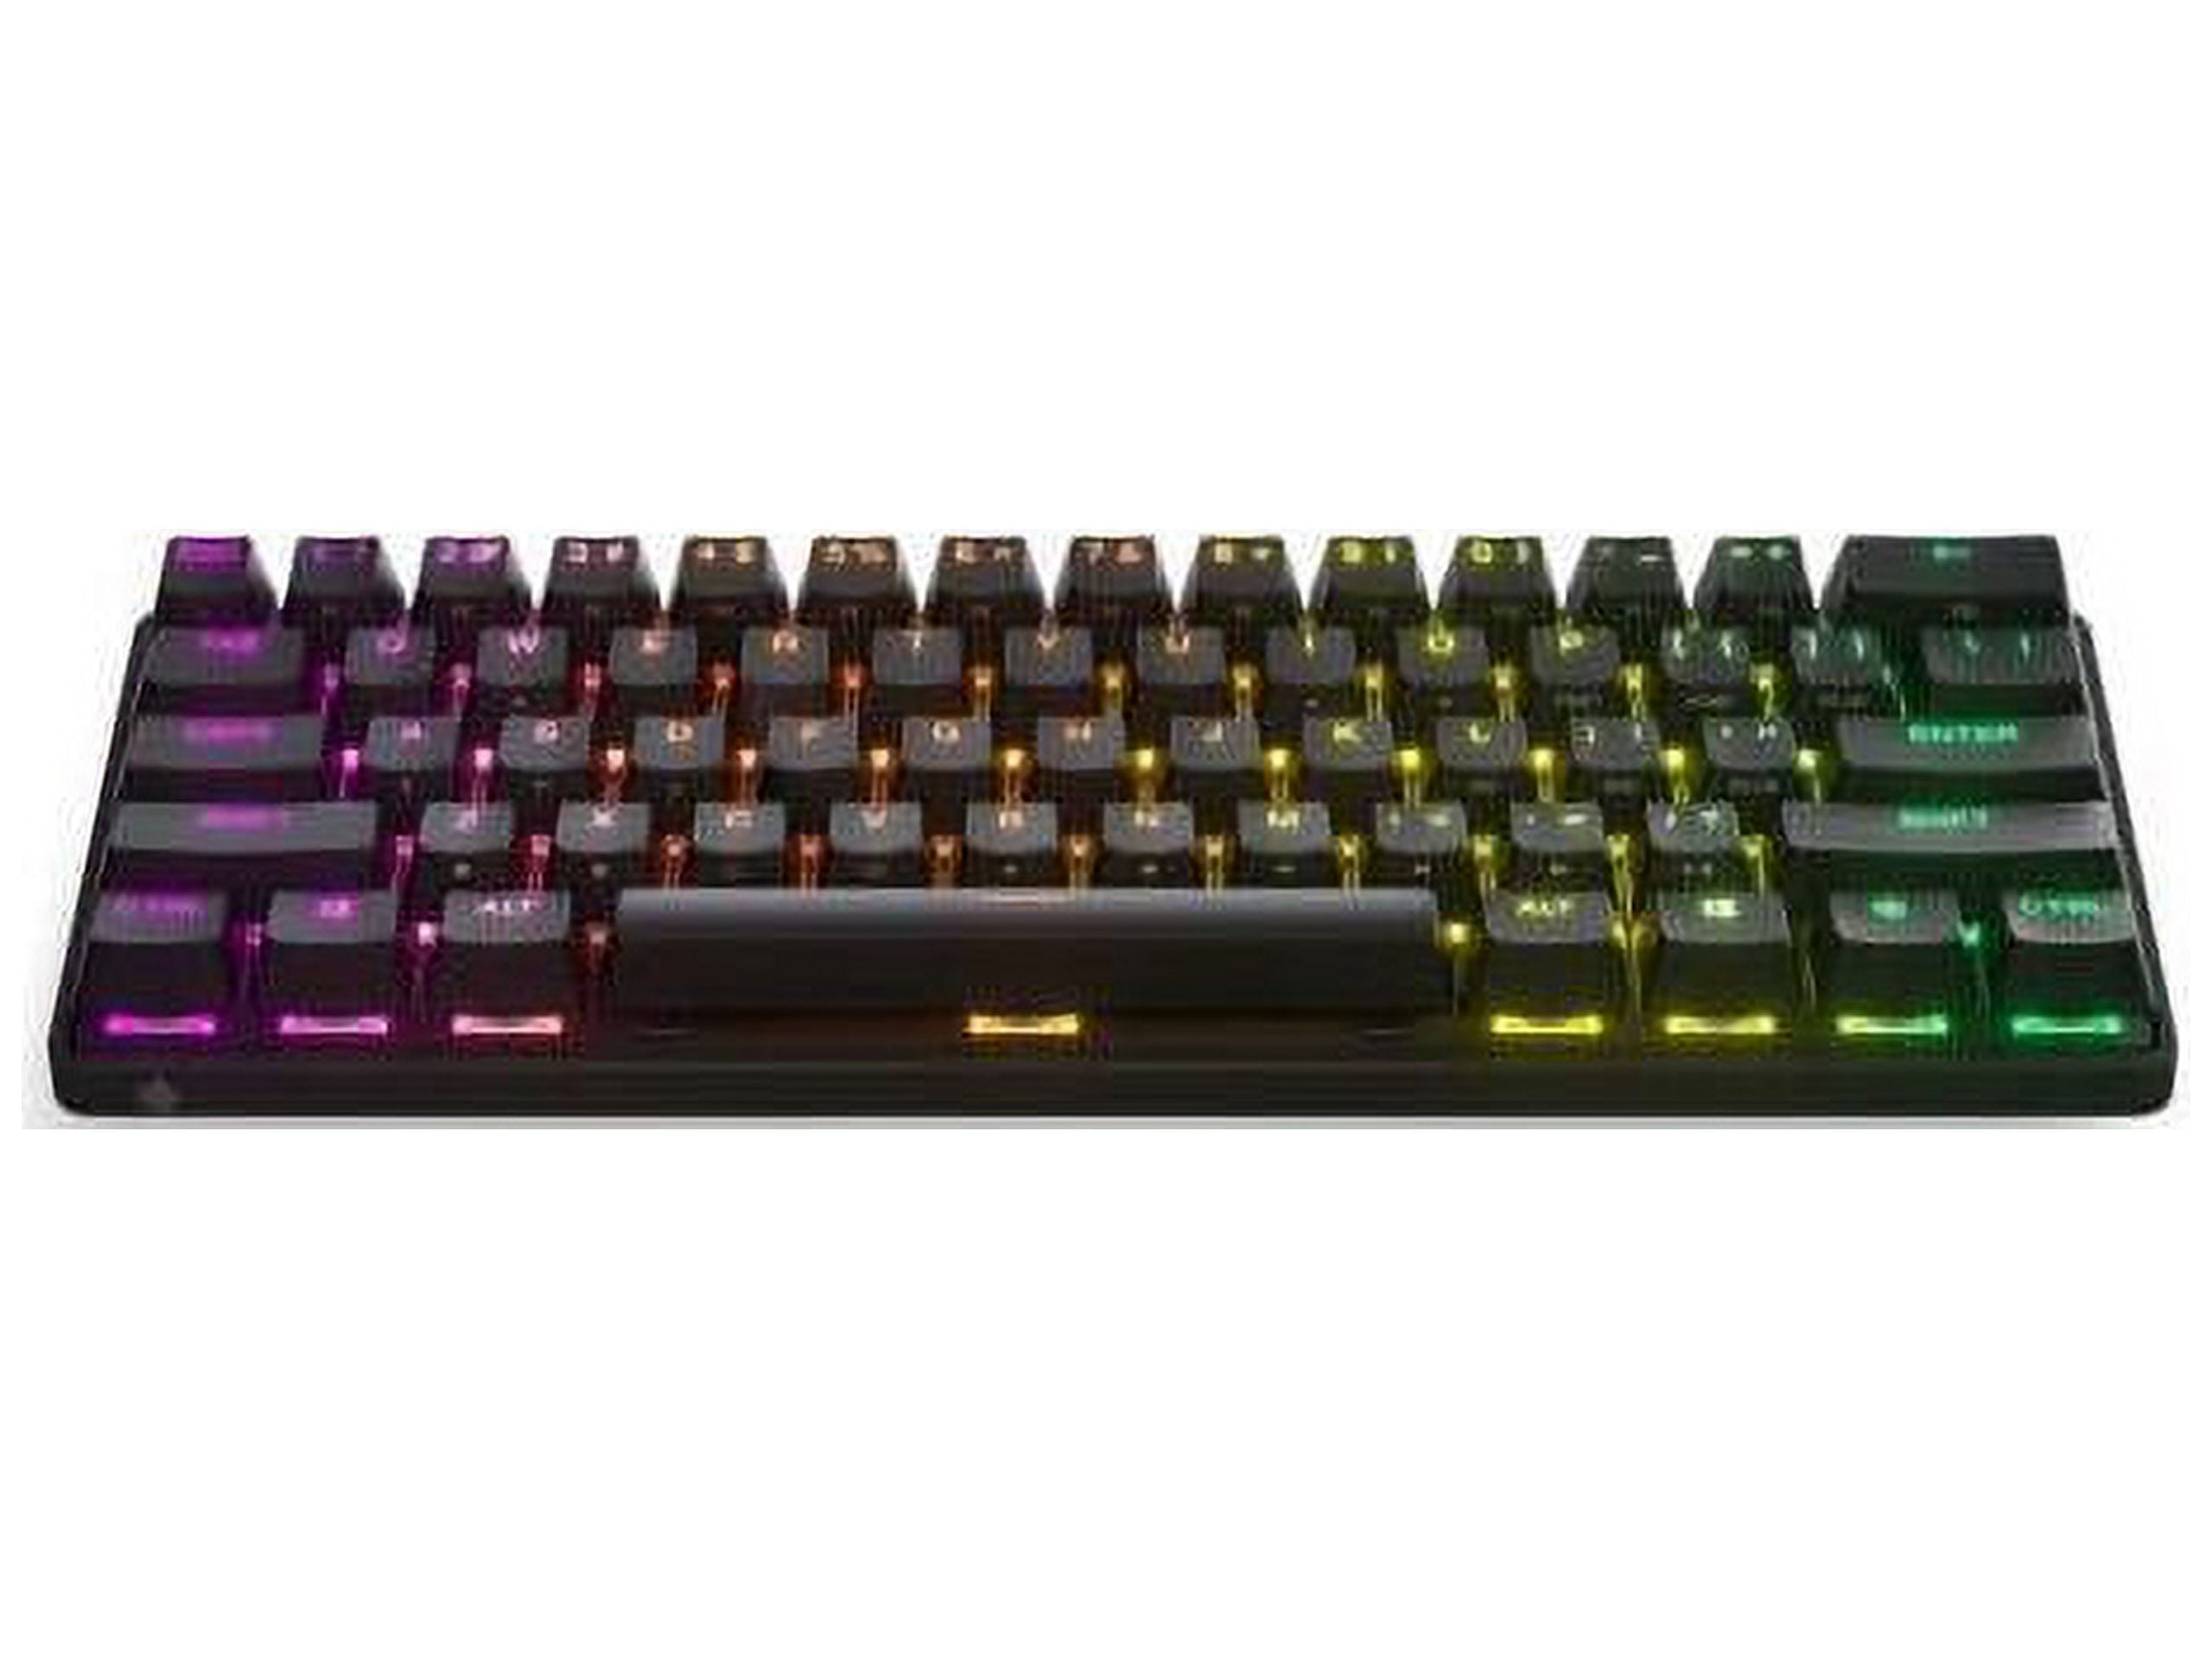 SteelSeries Apex Pro Mini Wireless Mechanical Gaming Keyboard - World's  Fastest Keyboard - Adjustable Actuation - Compact 60% Form Factor - RGB -  PBT